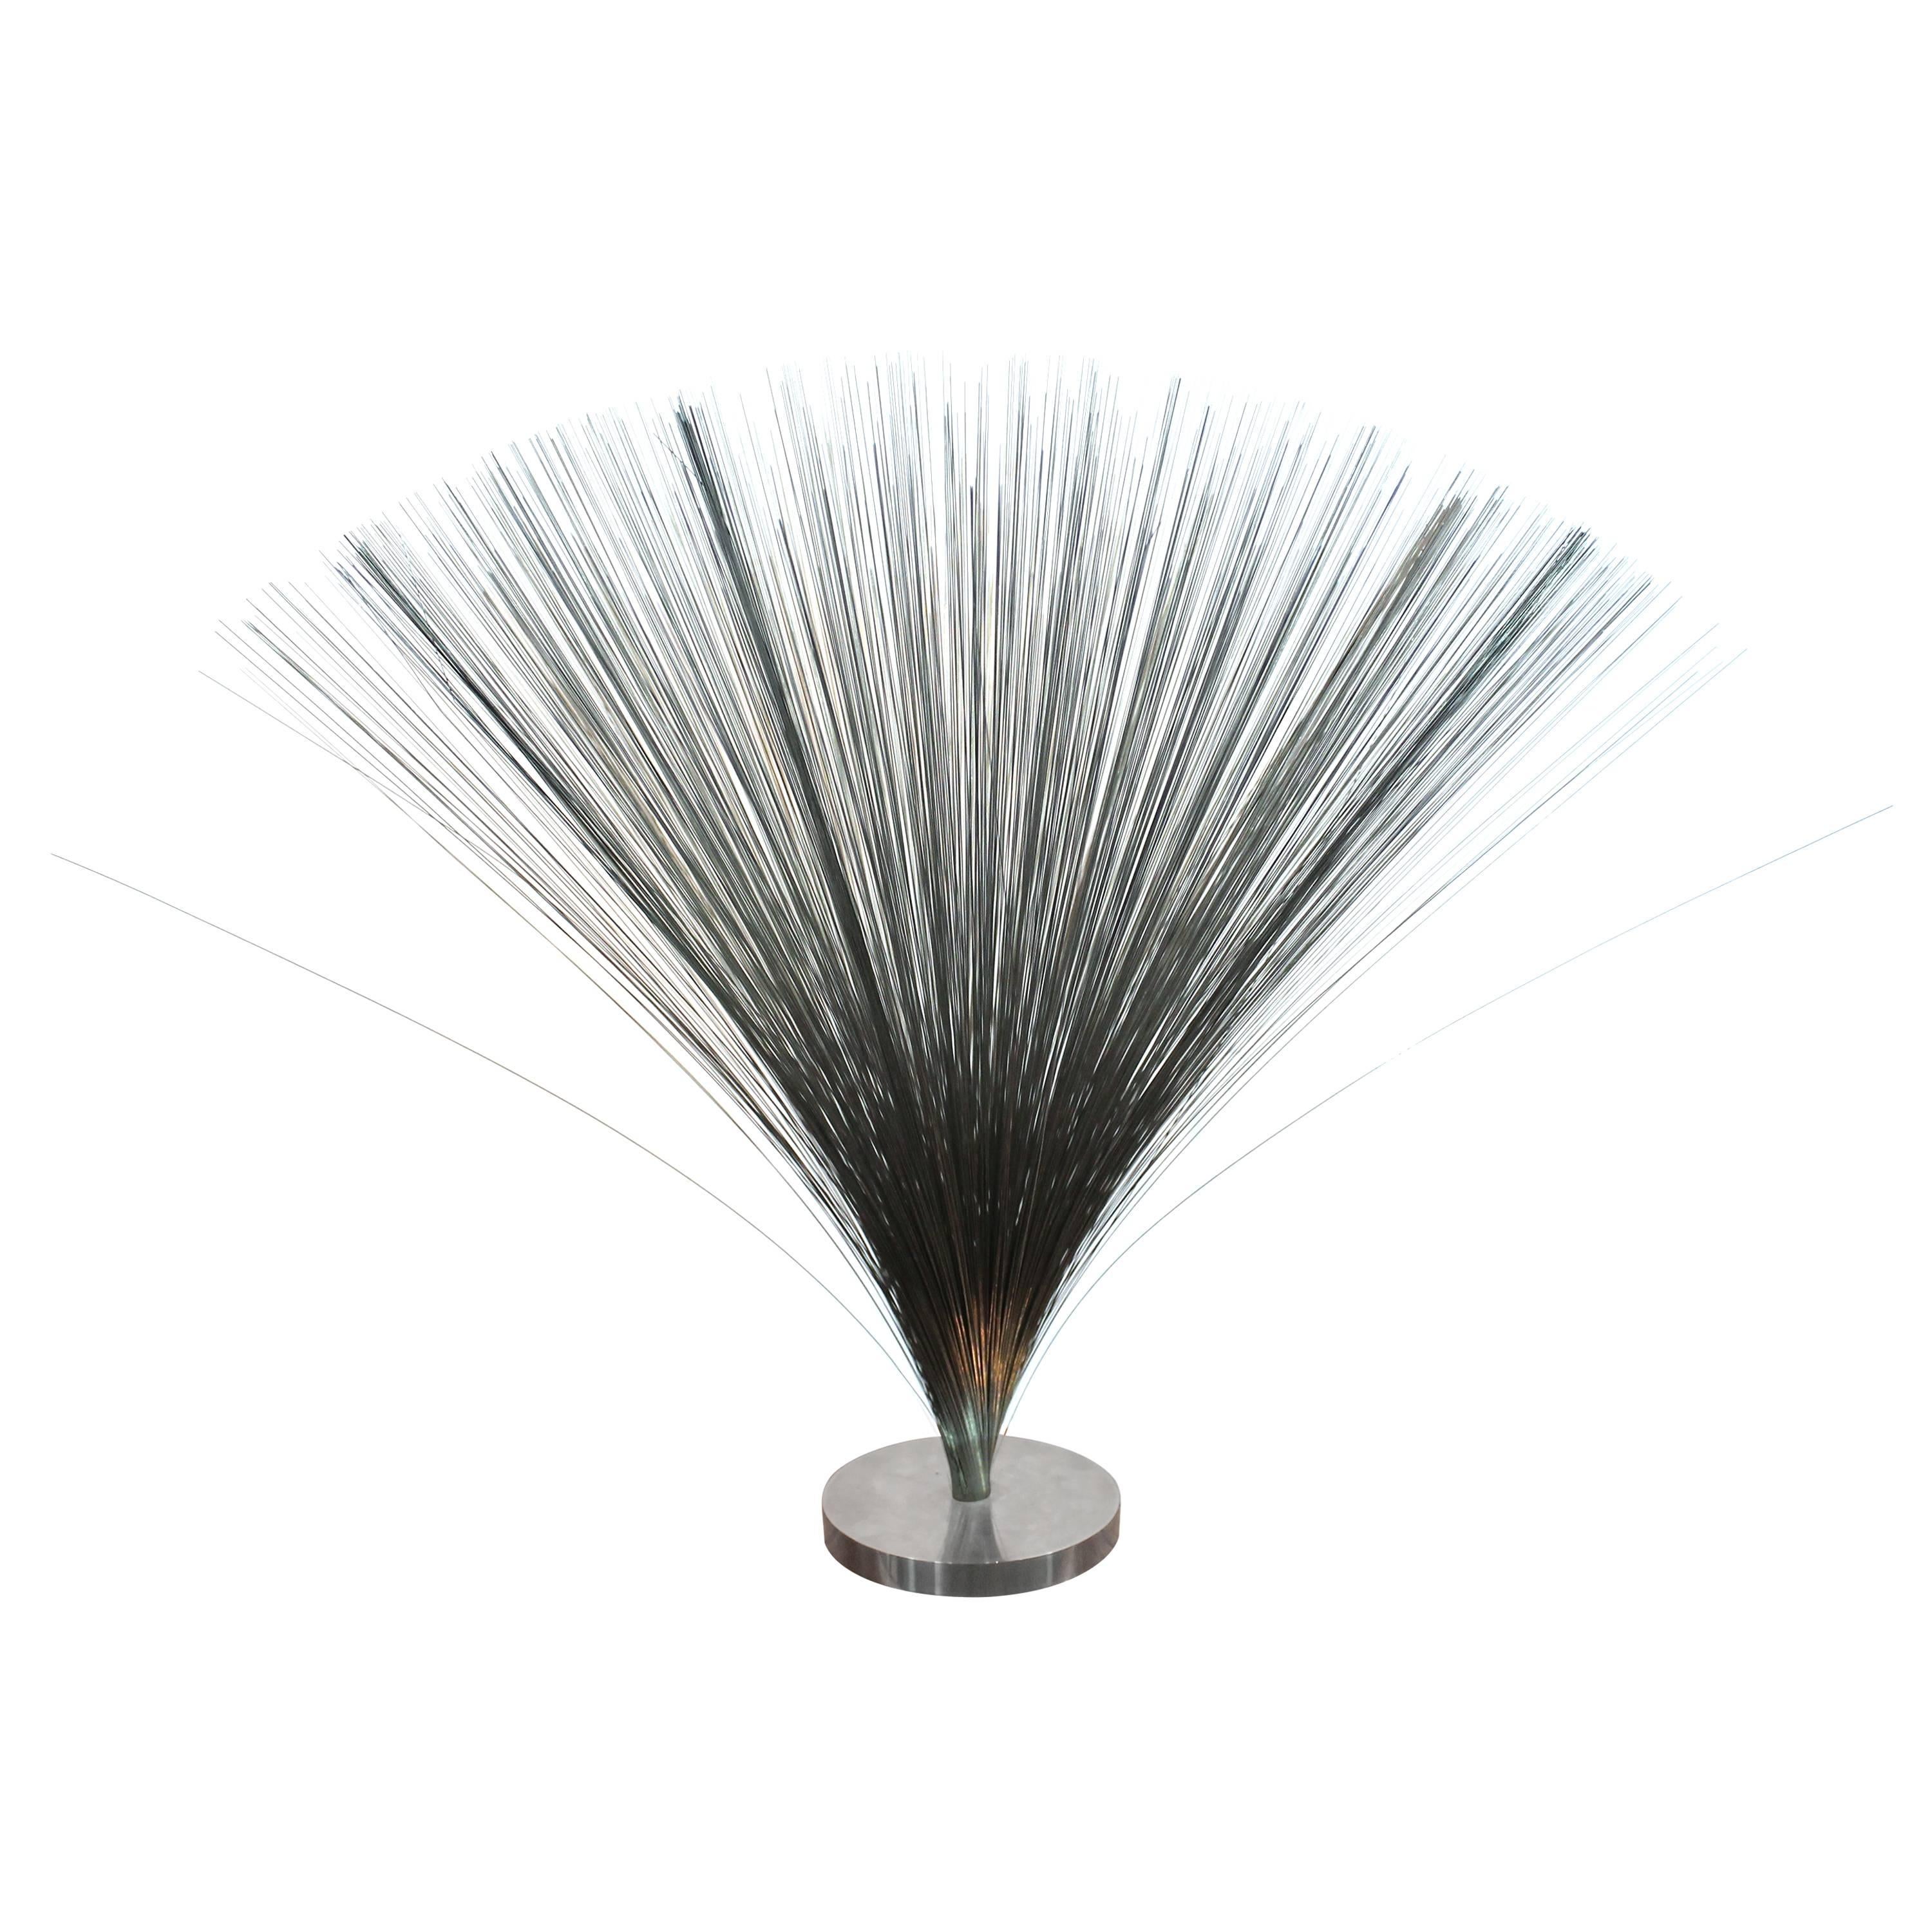 Kinetic Spray Sculpture by Tom McAllister after Bertoia For Sale